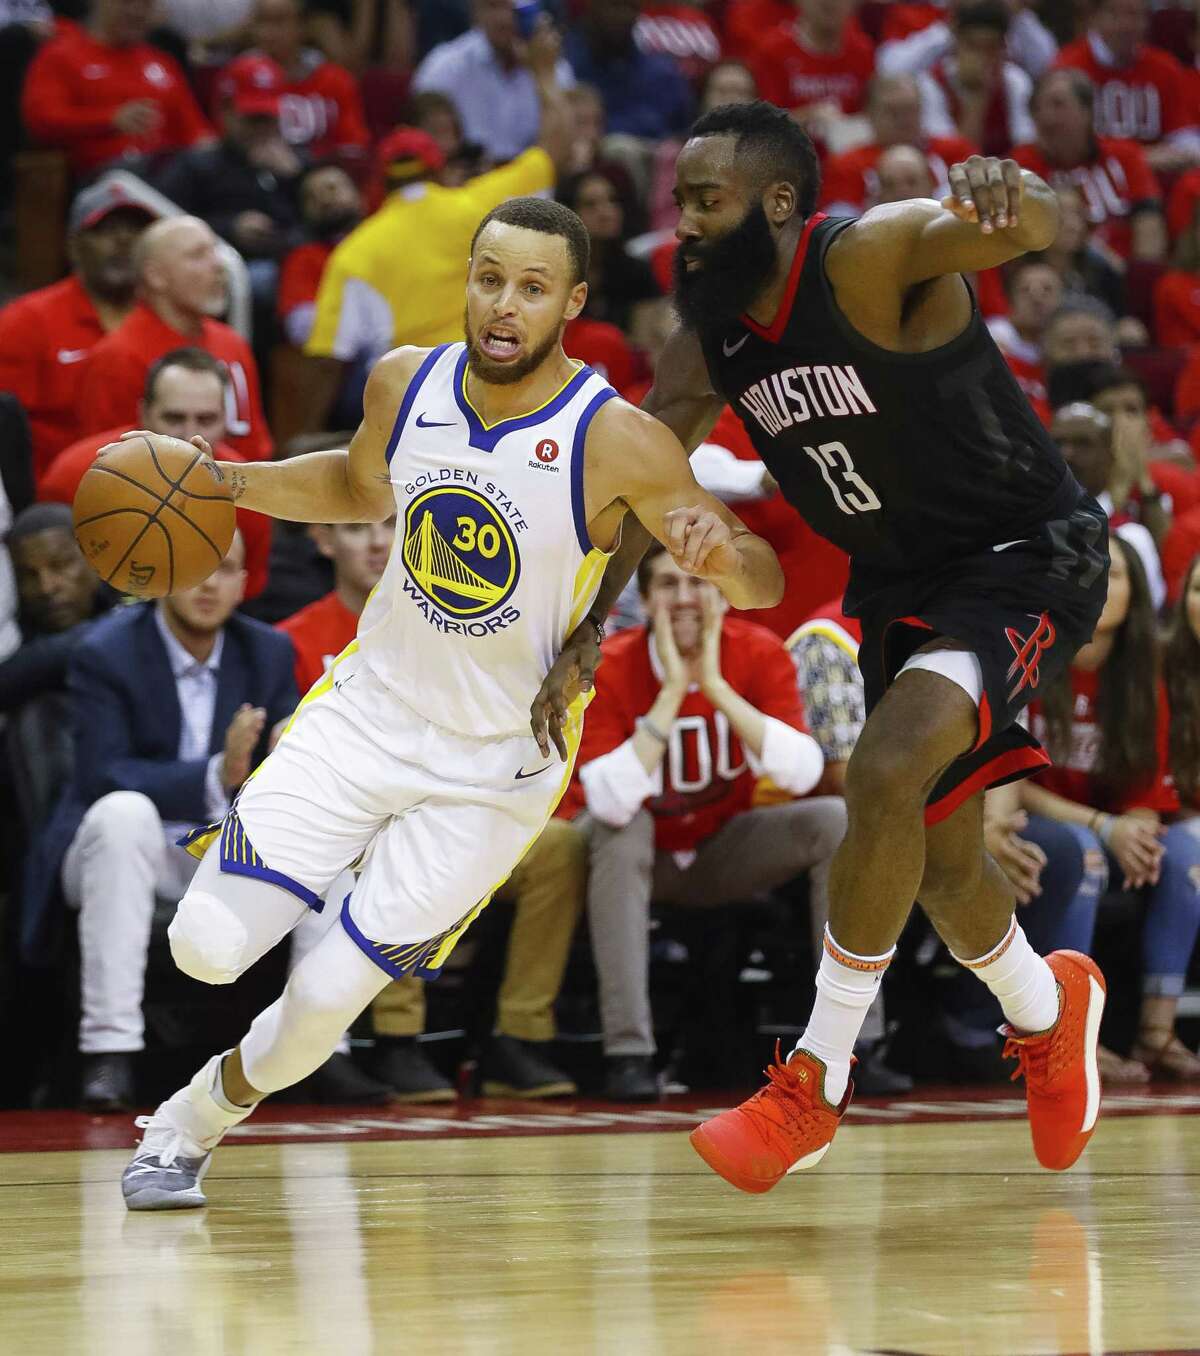 Golden State Warriors guard Stephen Curry (30) drives past Houston Rockets guard James Harden (13) during the second half in Game 1 of the NBA Western Conference Finals at Toyota Center on Monday, May 14, 2018, in Houston. ( Brett Coomer / Houston Chronicle )